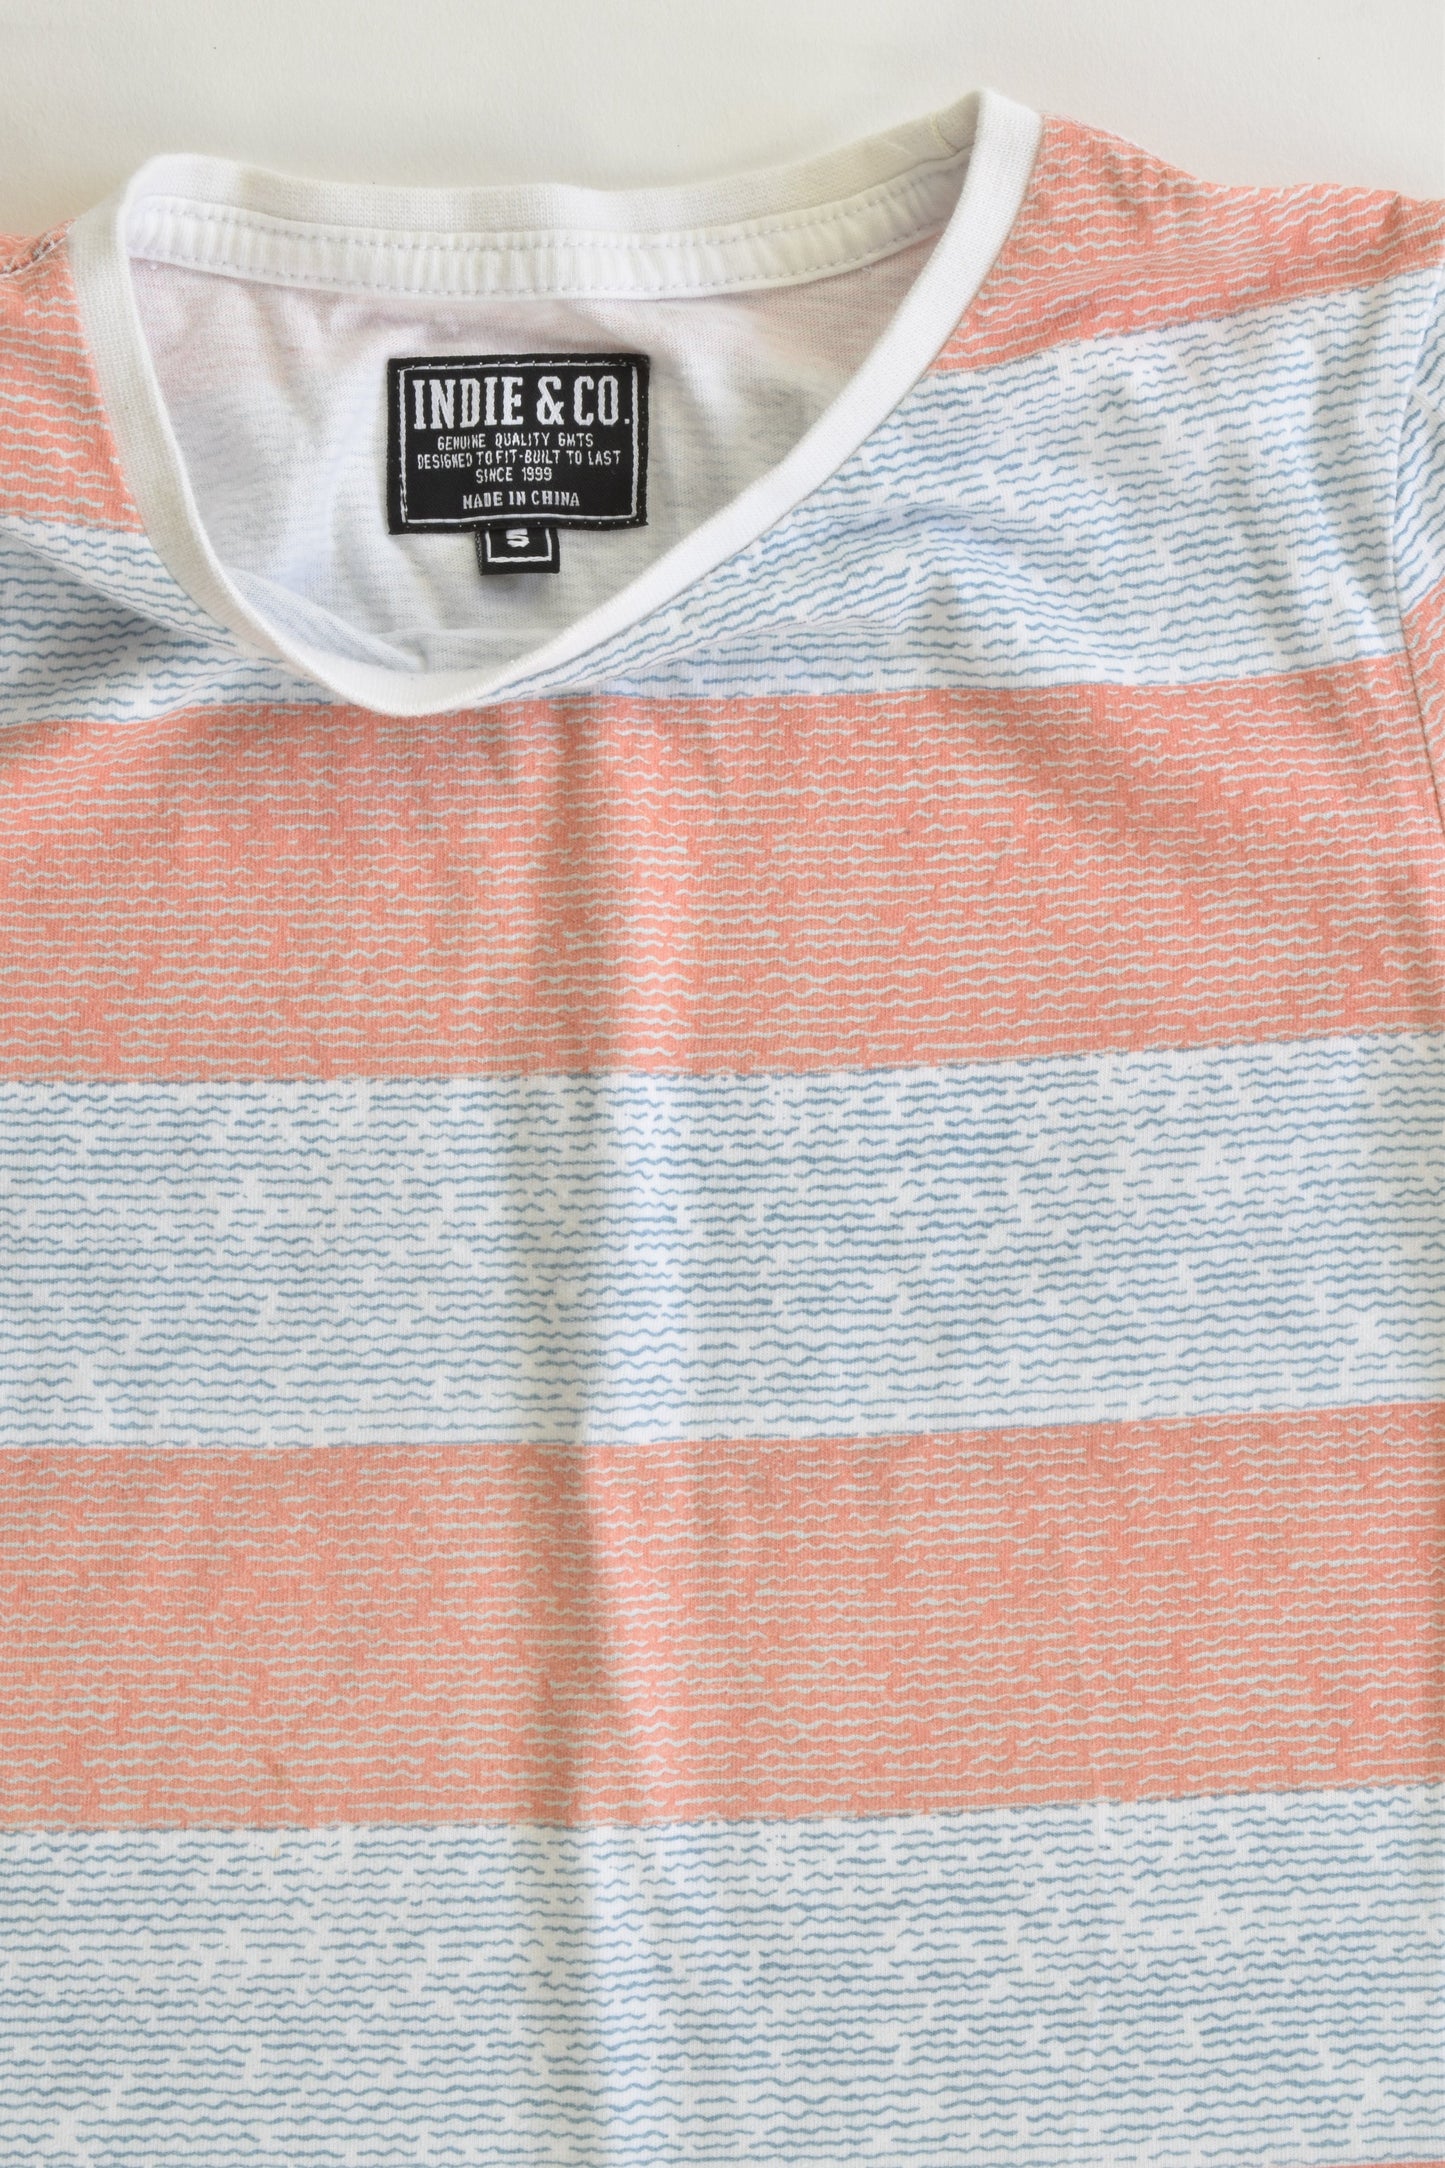 Indie & Co Size 5 T-shirt